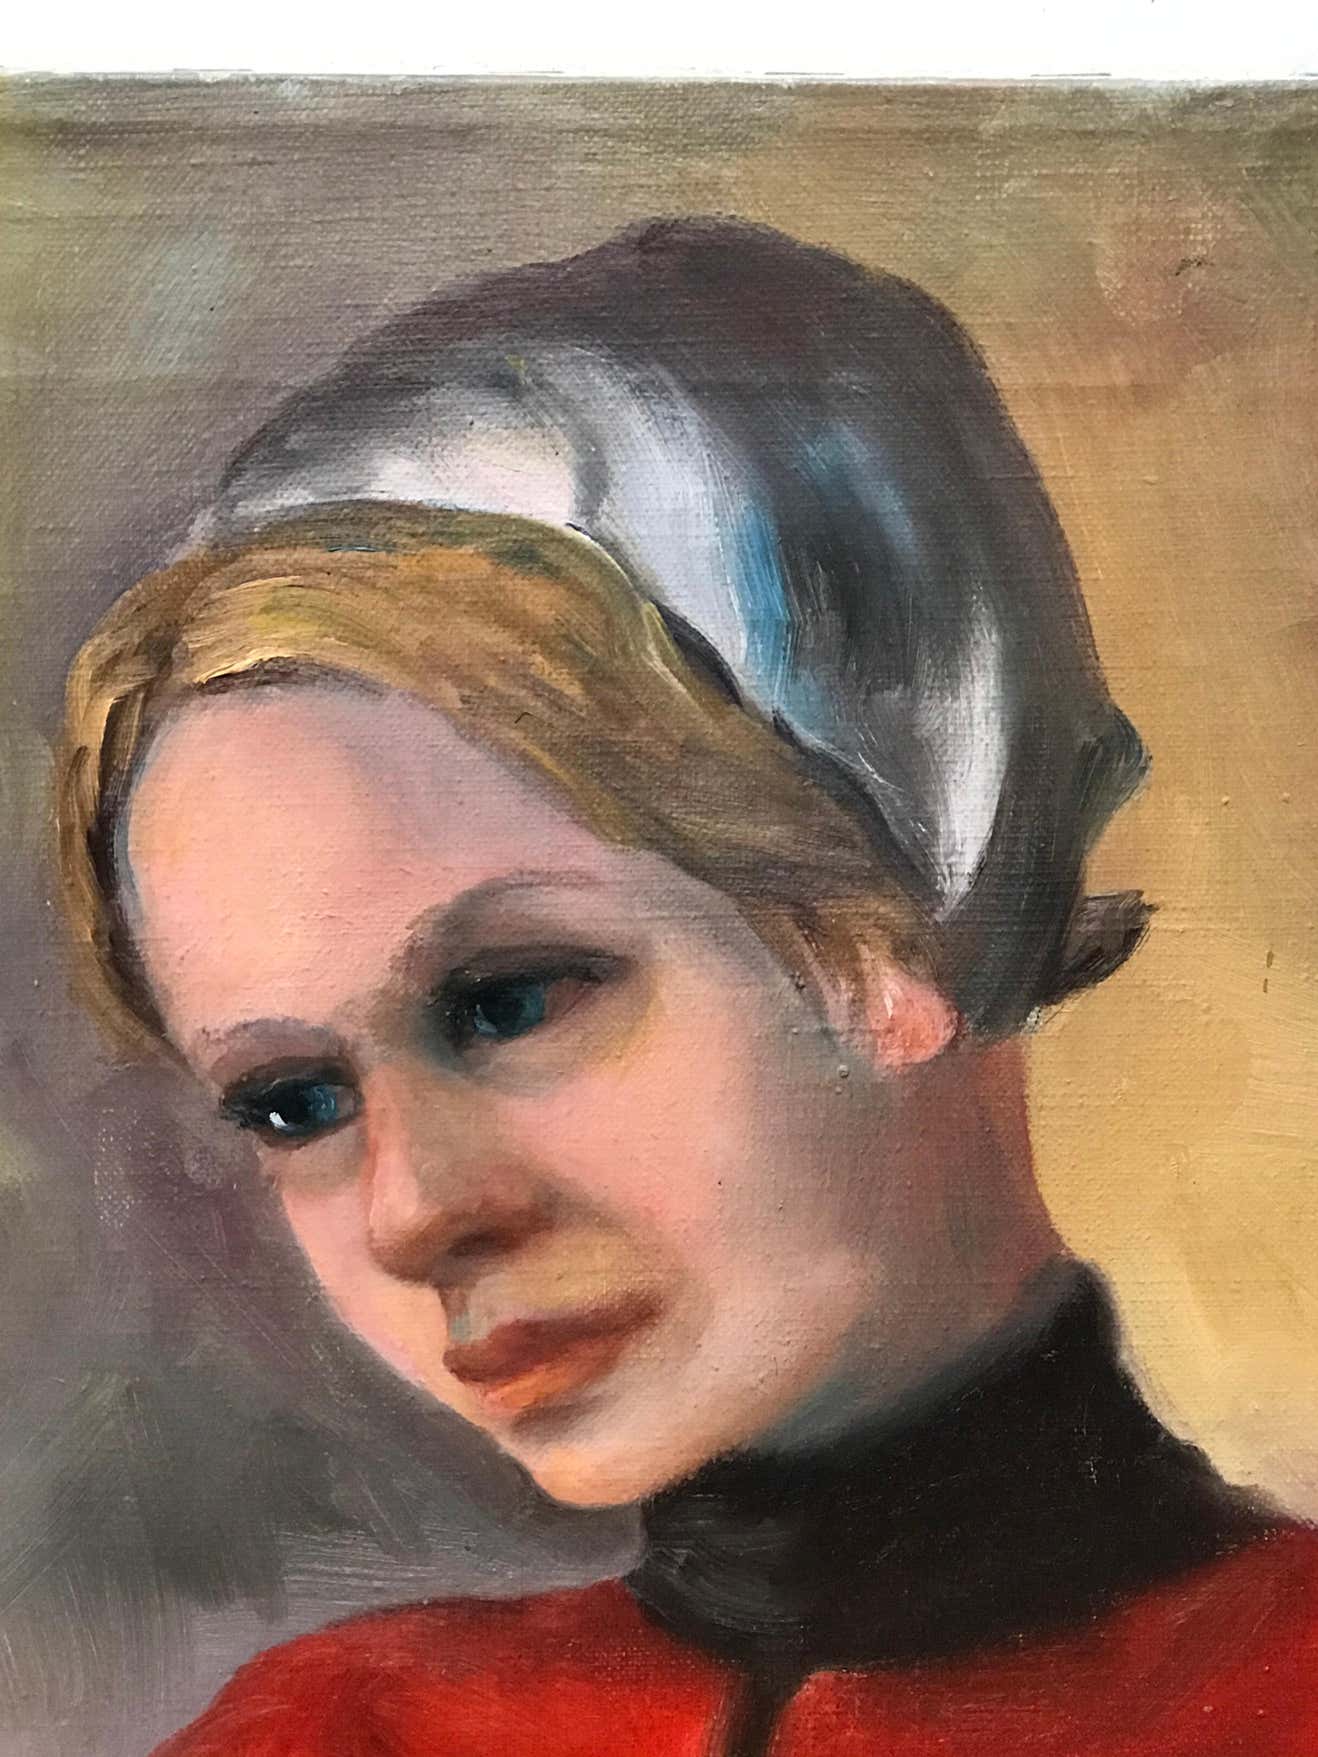 Portrait of a Blonde Girl in a Red Dress Wearing a White Beanie, Oil on Canvas